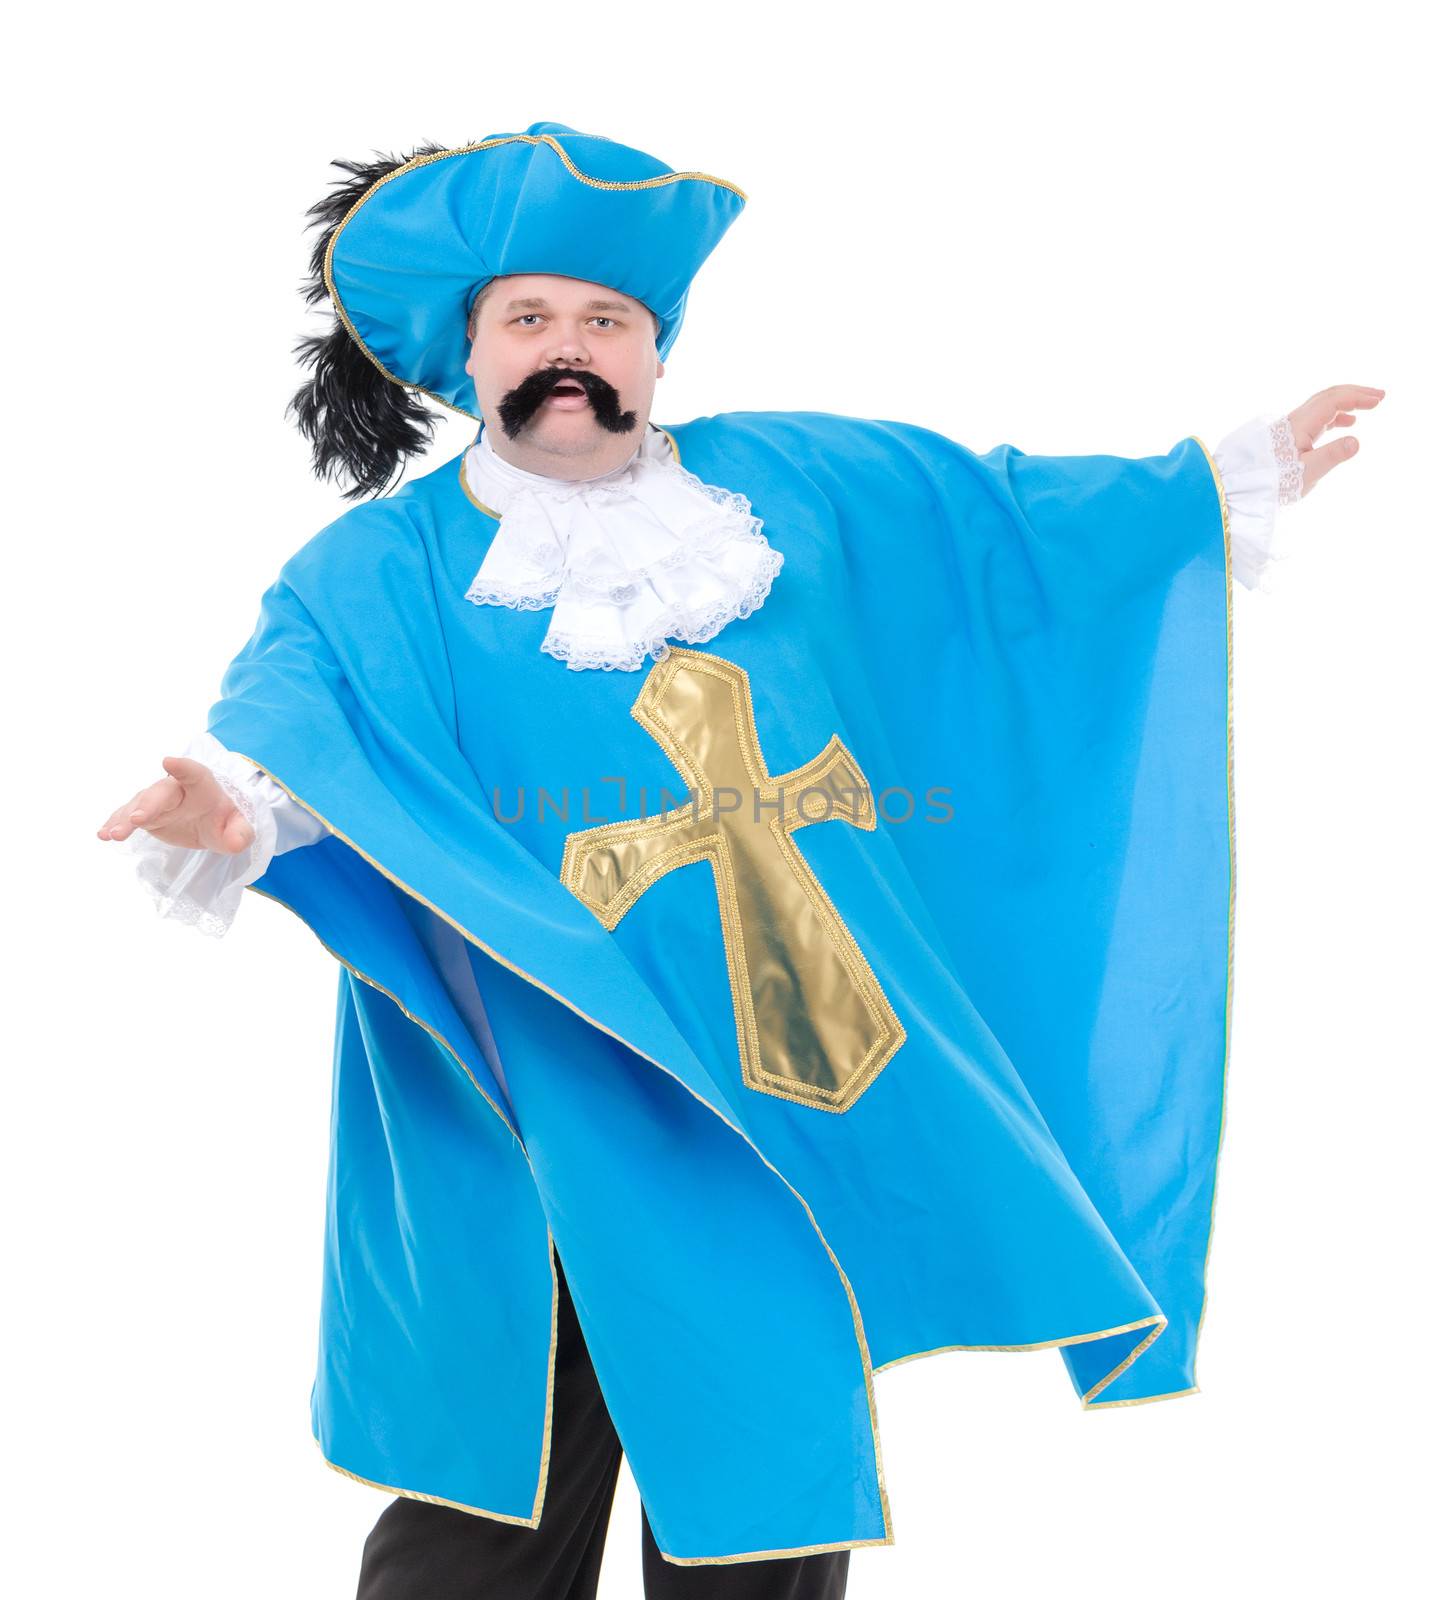 Musketeer in turquoise blue uniform by Discovod